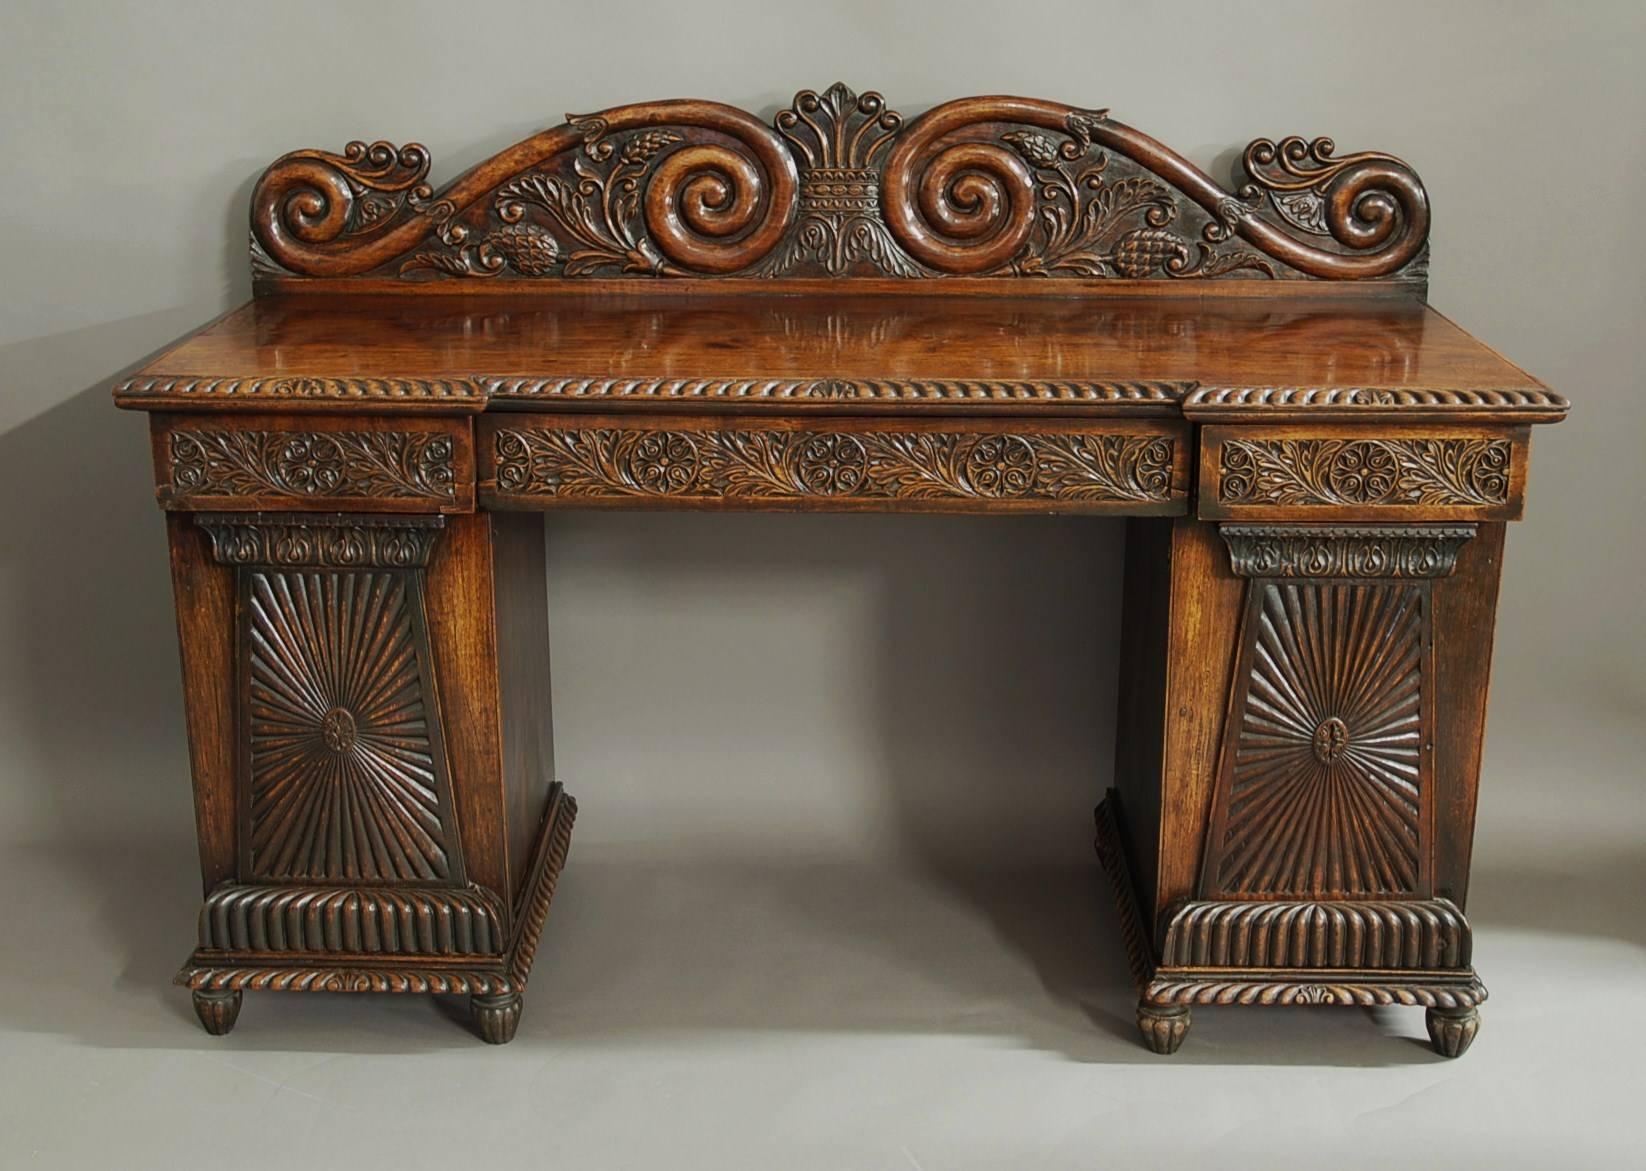 Superb quality mid 19th century Anglo Indian padouk inverted breakfront pedestal sideboard of superb patina (colour) from Bombay or Southern India.

This sideboard consists of a finely carved back-splash with central anthemion design with scrolling